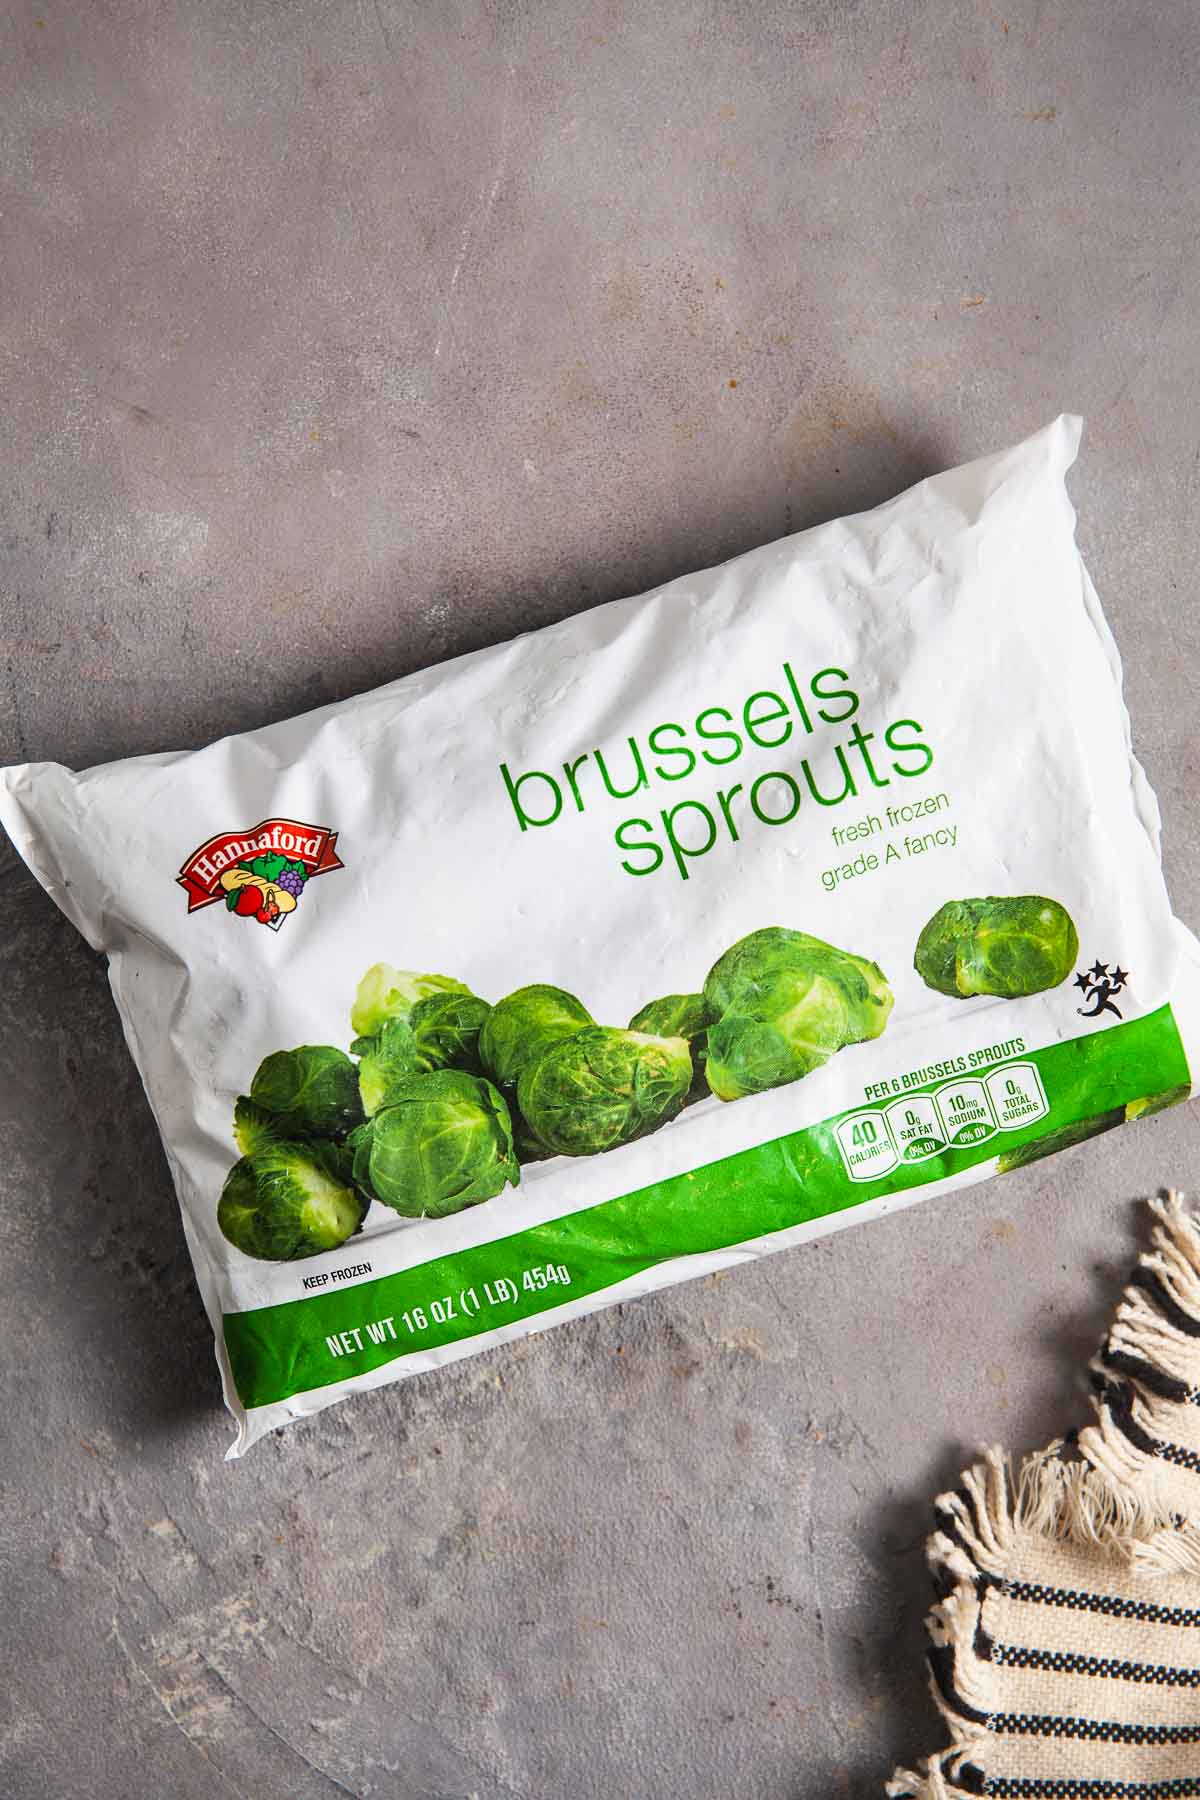 A bag of frozen brussels sprouts. 